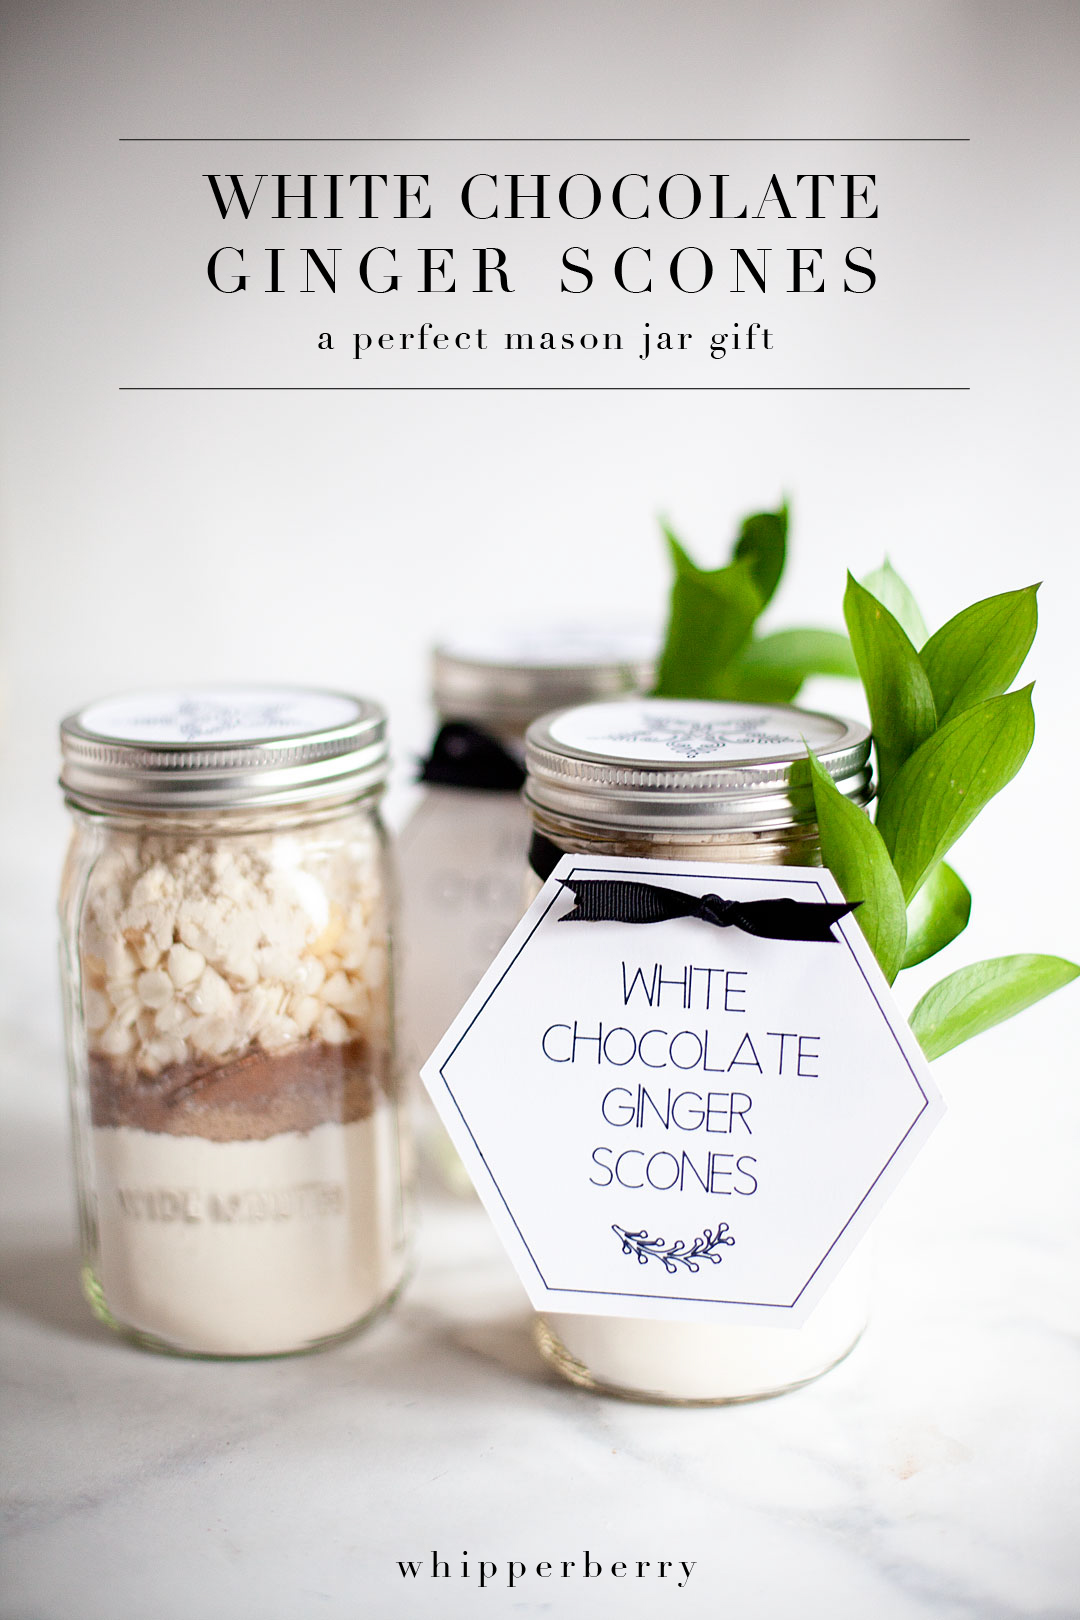 This year, I’m working on all kinds of fun gifts for the Holidays that will look spectacular gifted inside of a jar. One of my favorites is the White Chocolate Ginger Scone Mix in a jar. It’s really easy to put together a whole bunch of these gifts and really not expensive at all. It’s always a bonus to save a little money during the holidays. @ballcanning #giftsinajar #neighborgifts #teachergifts #sconeinajar